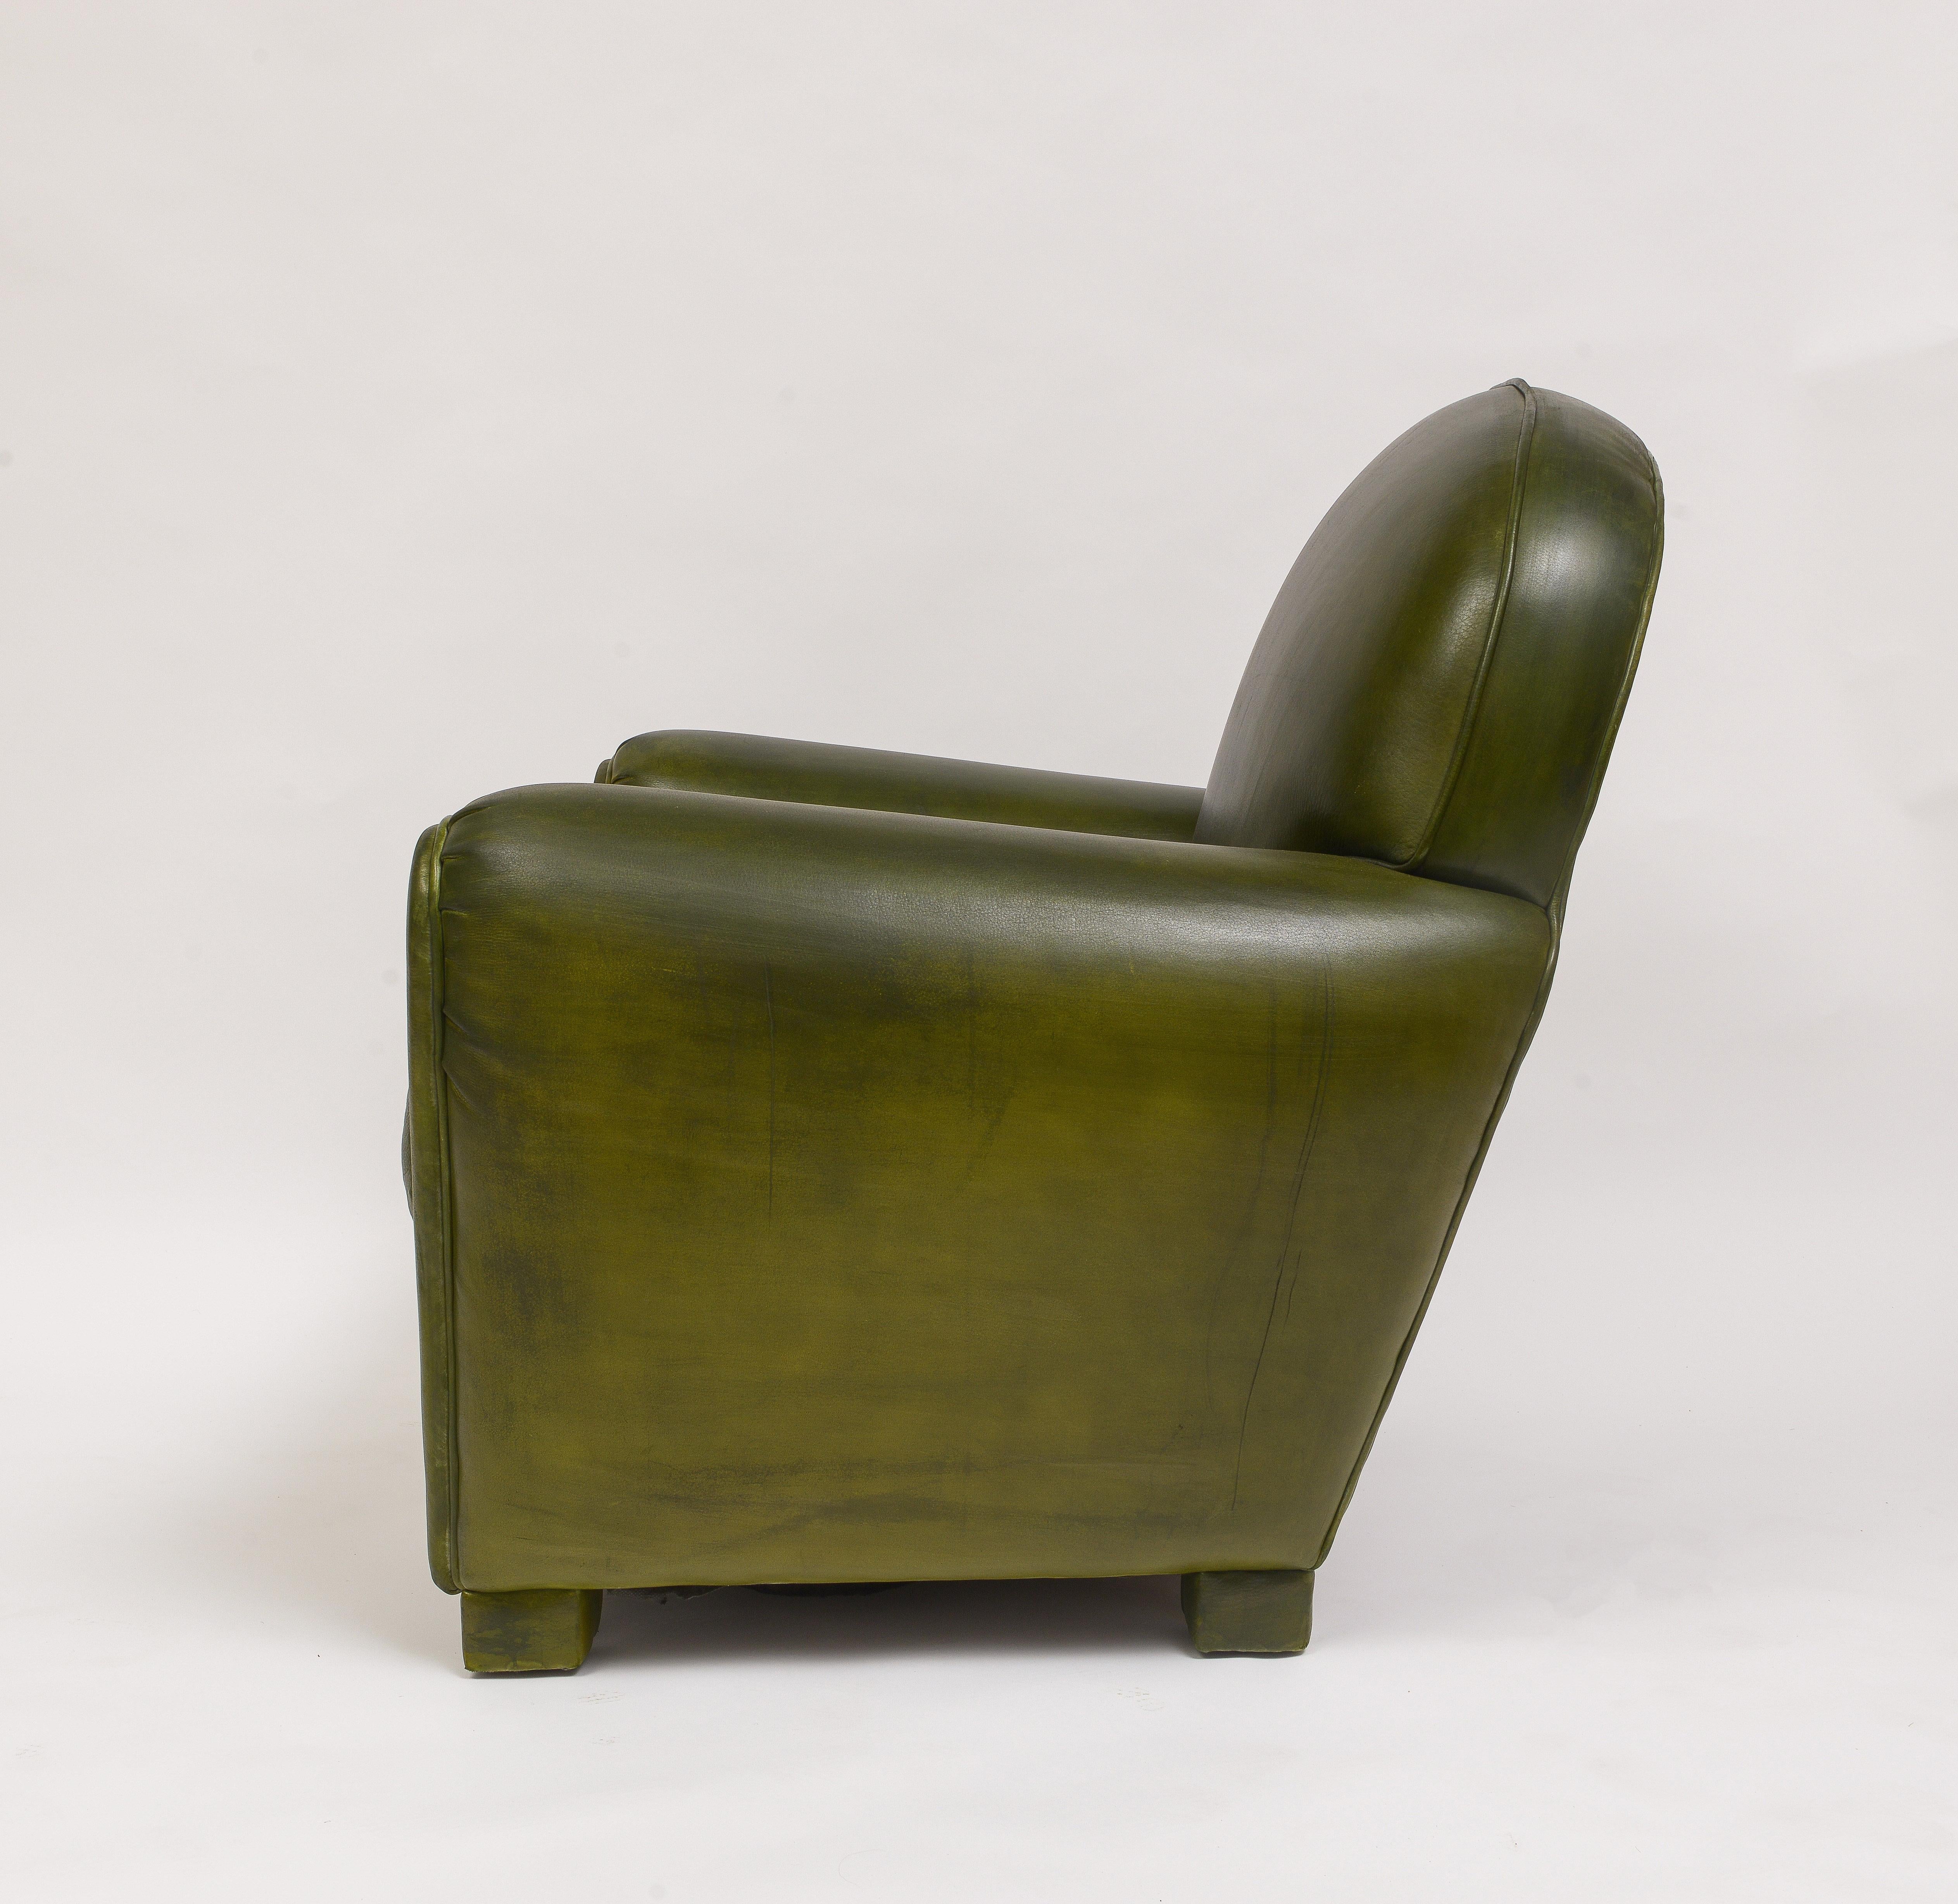 Early 21st Century Green Leather Club Chairs With Ottomans- 4 Pieces In Excellent Condition For Sale In Brooklyn, NY